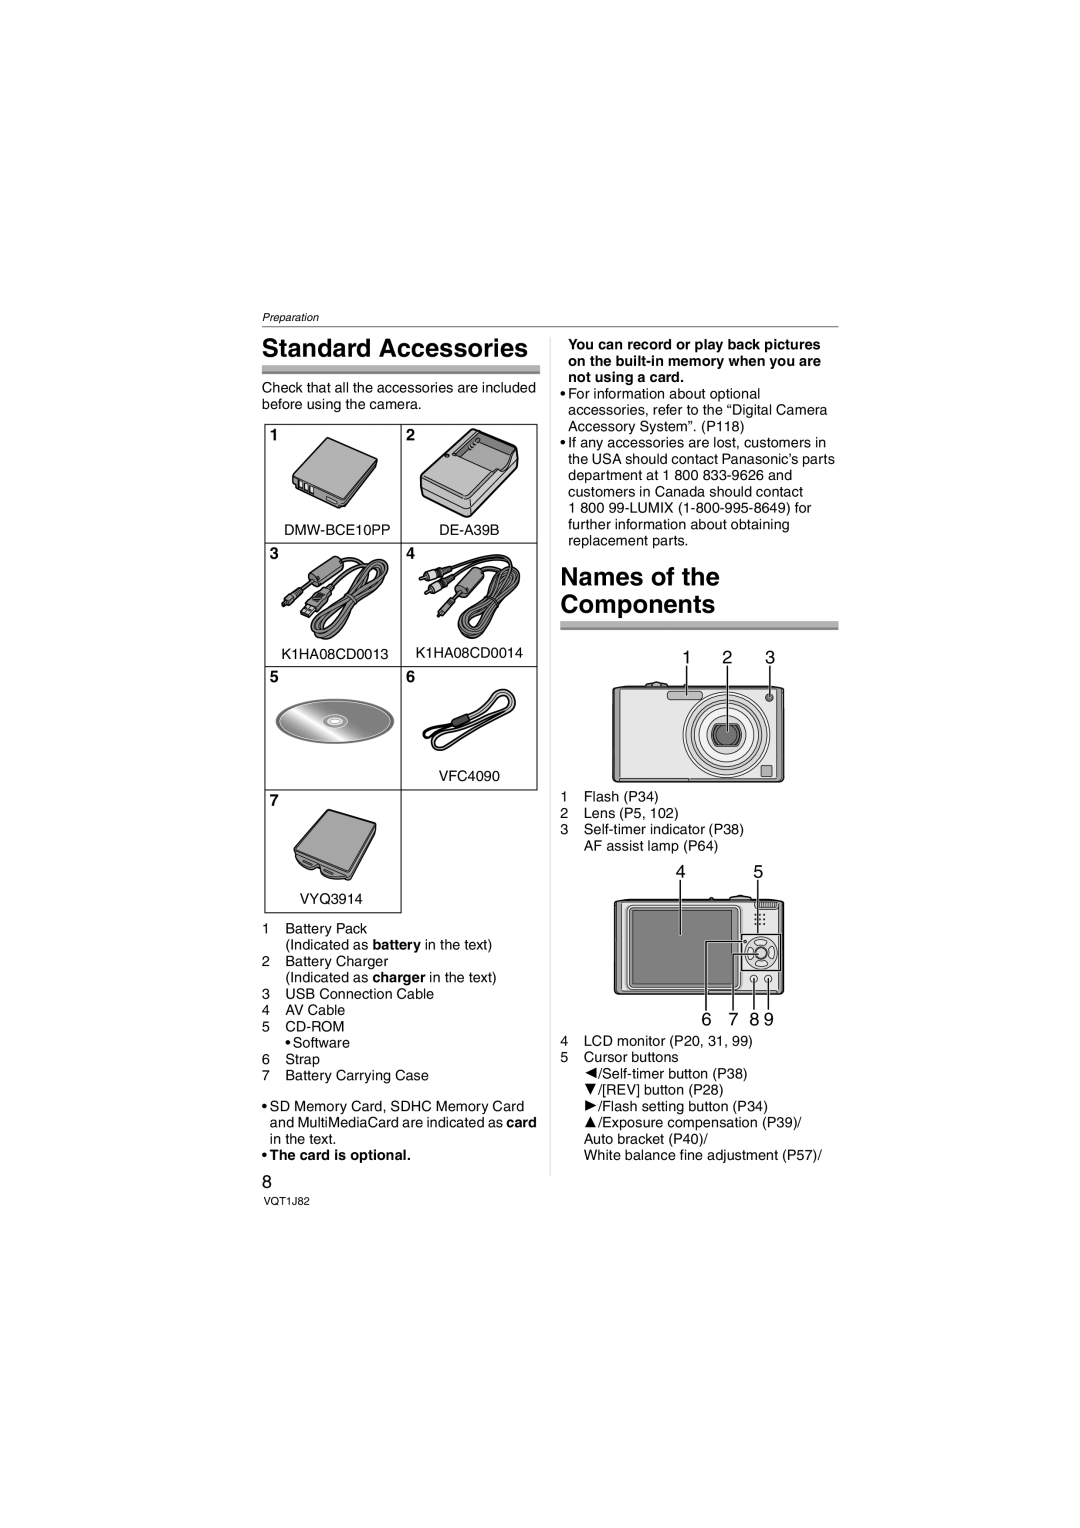 Panasonic DMC-FX33 operating instructions Standard Accessories, Names of the Components, 6 7 8, The card is optional 